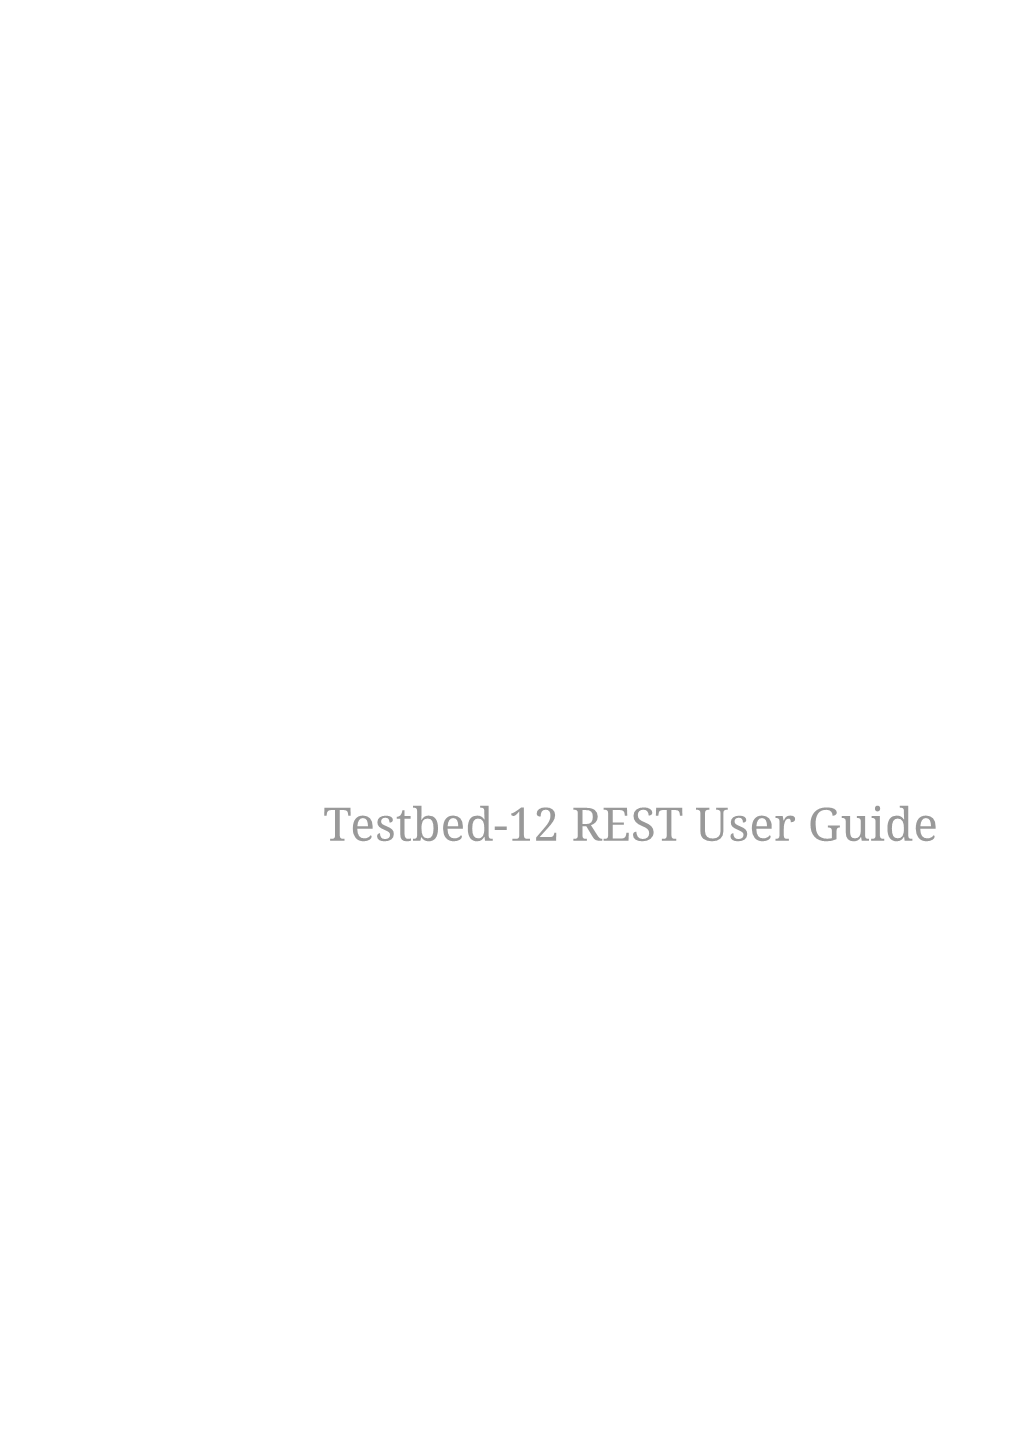 Testbed-12 REST User Guide Table of Contents